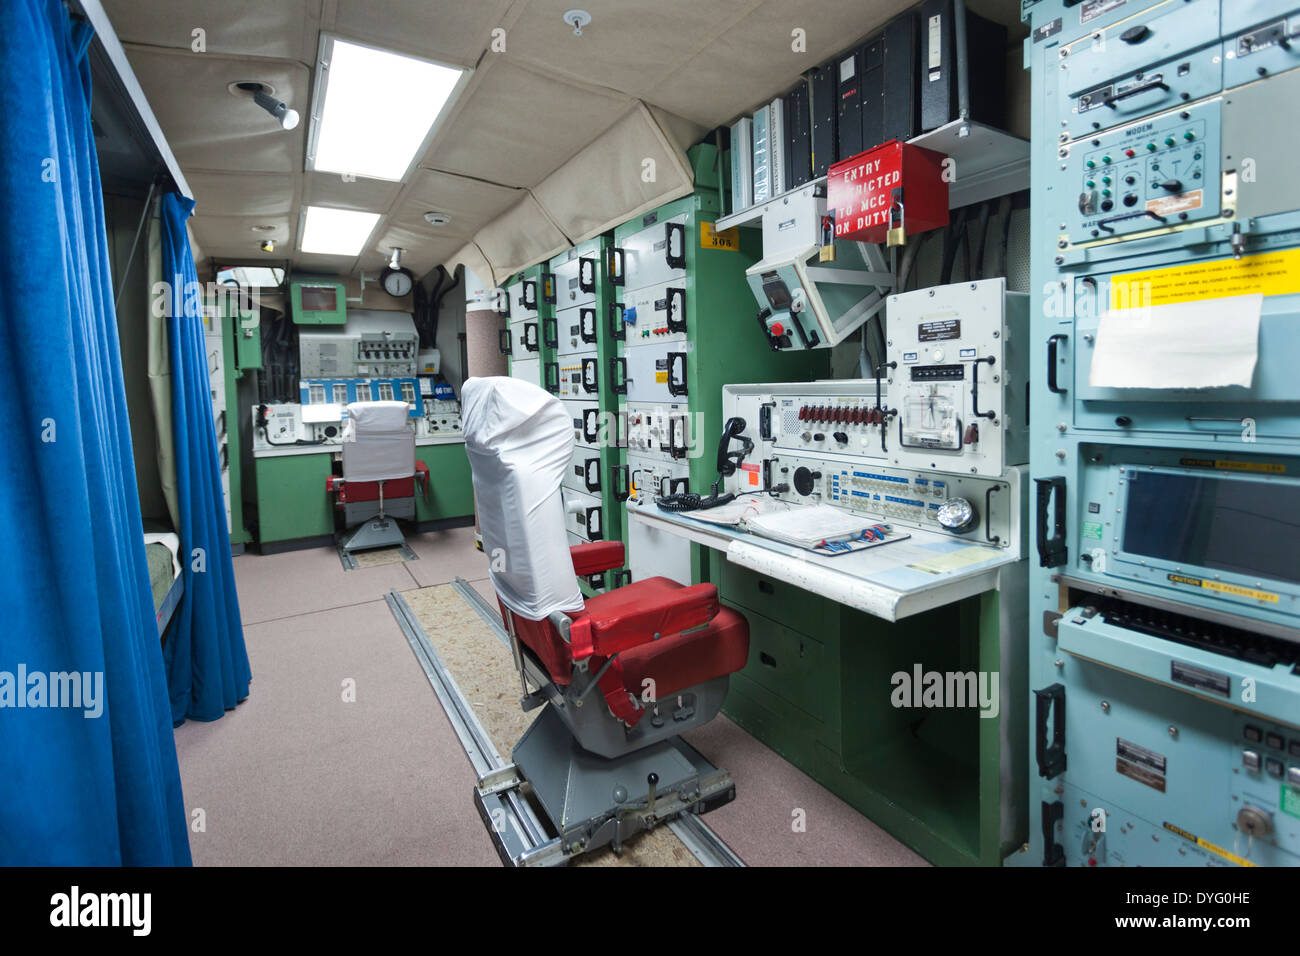 USA, South Dakota, Philip, Minuteman II ICBM missile underground launch control site Delta-01, nuclear missile launch console Stock Photo